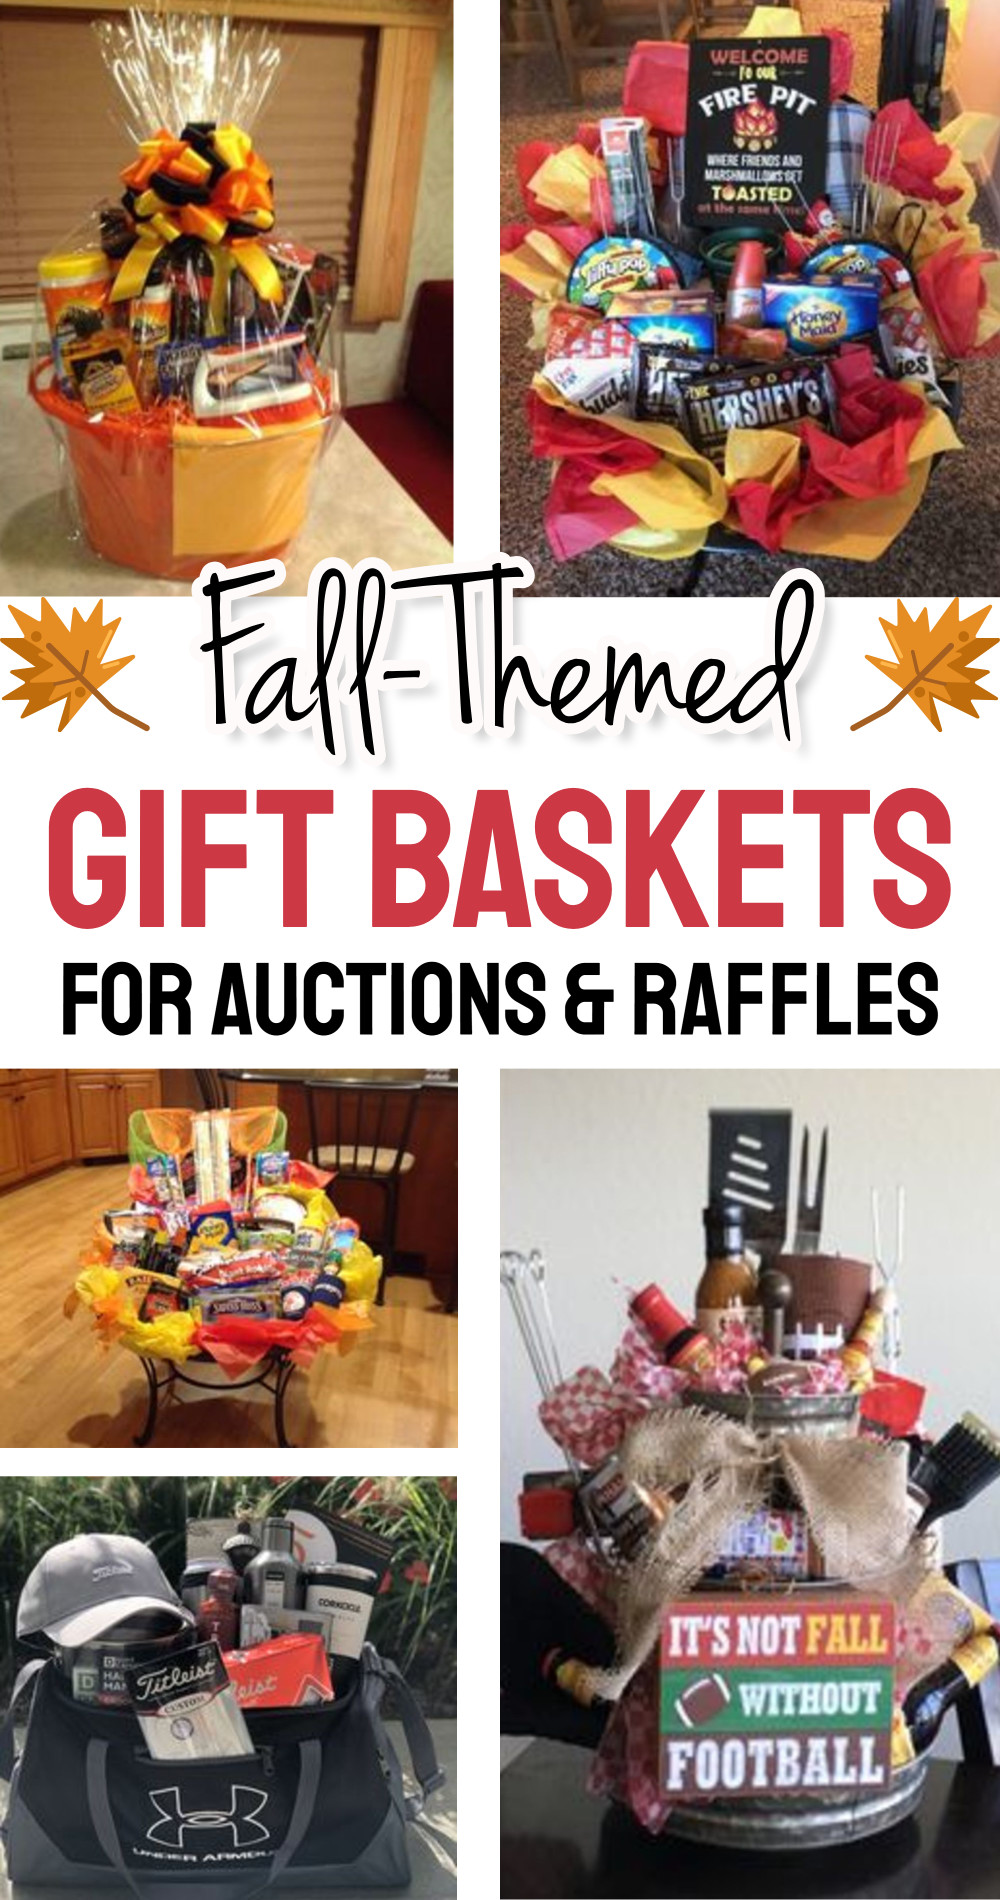 Fall Themed Gift Baskets For Auctions, Raffles and Fall Festivals